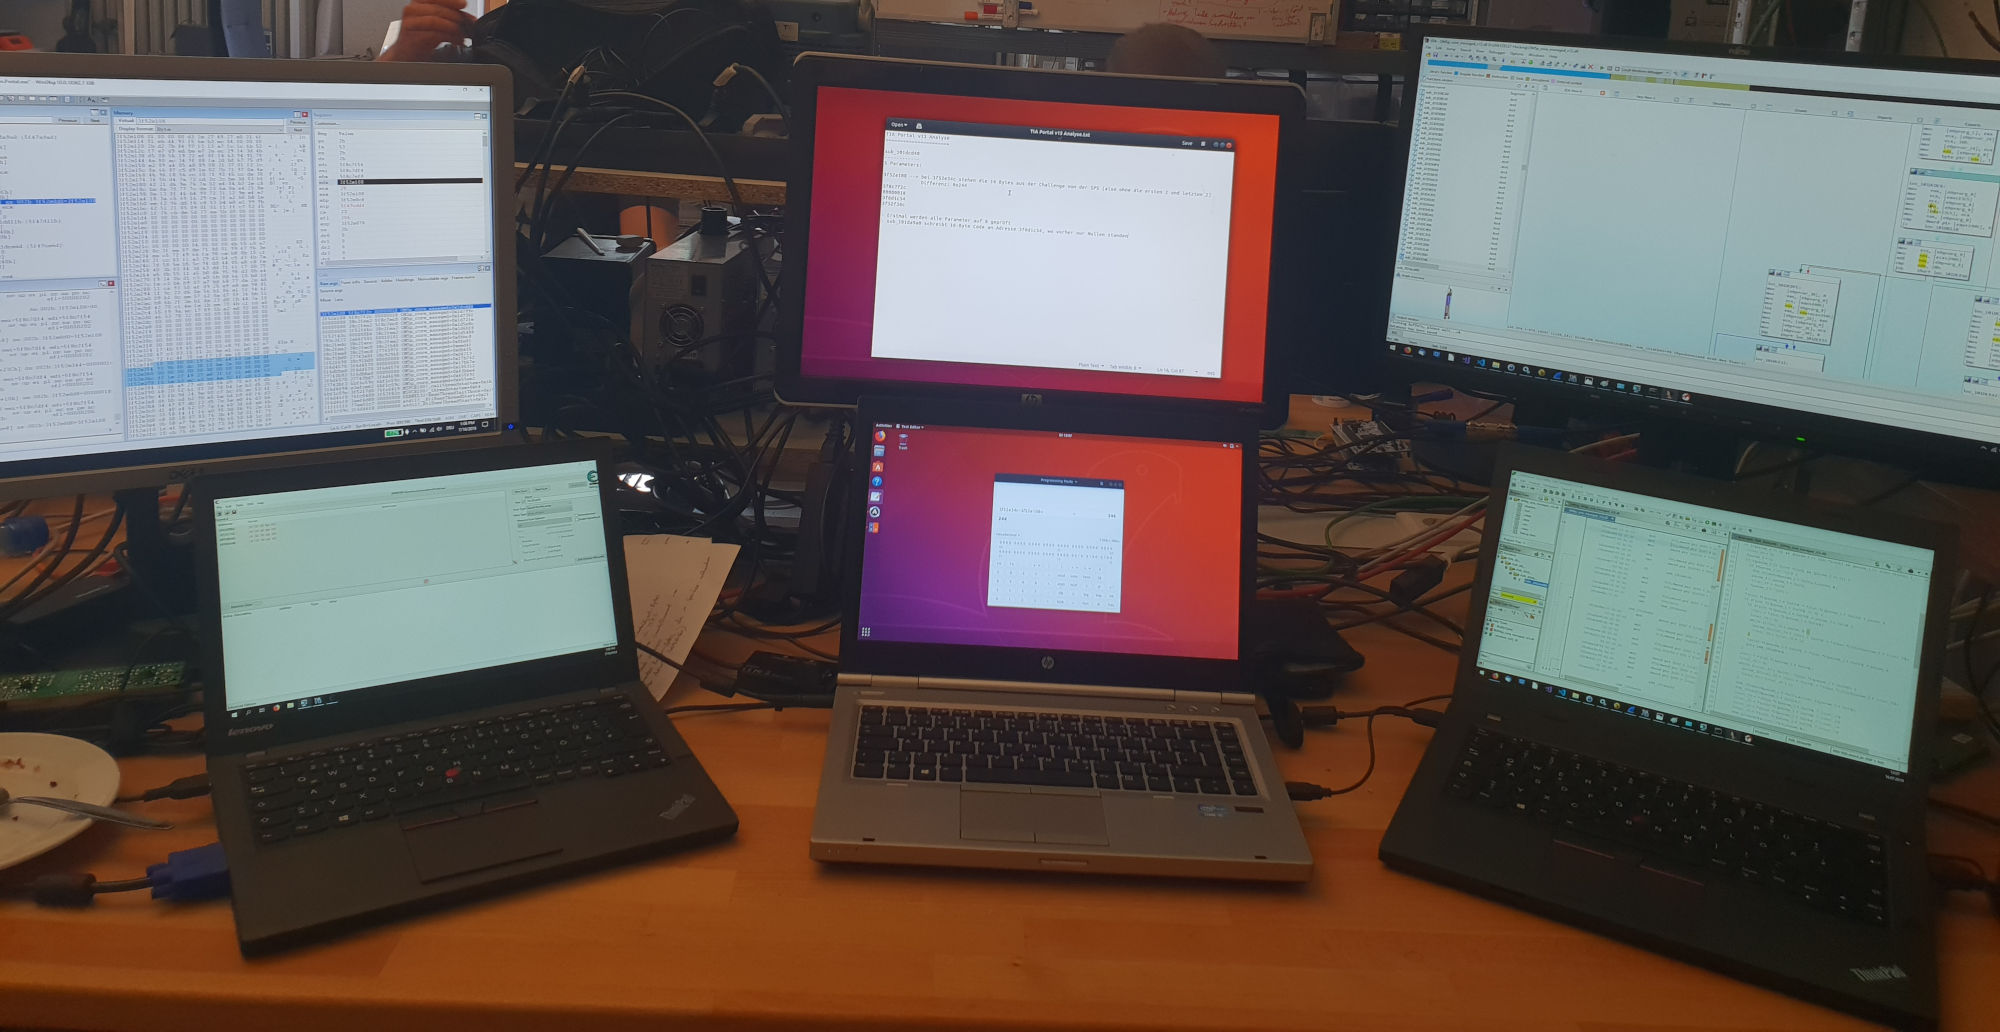 3 laptops with 2 screens each, running WinDbg, Cheat Engine, a text editor, a calculator, IDA and Ghidra -- A photo from the early days of ENLYZE